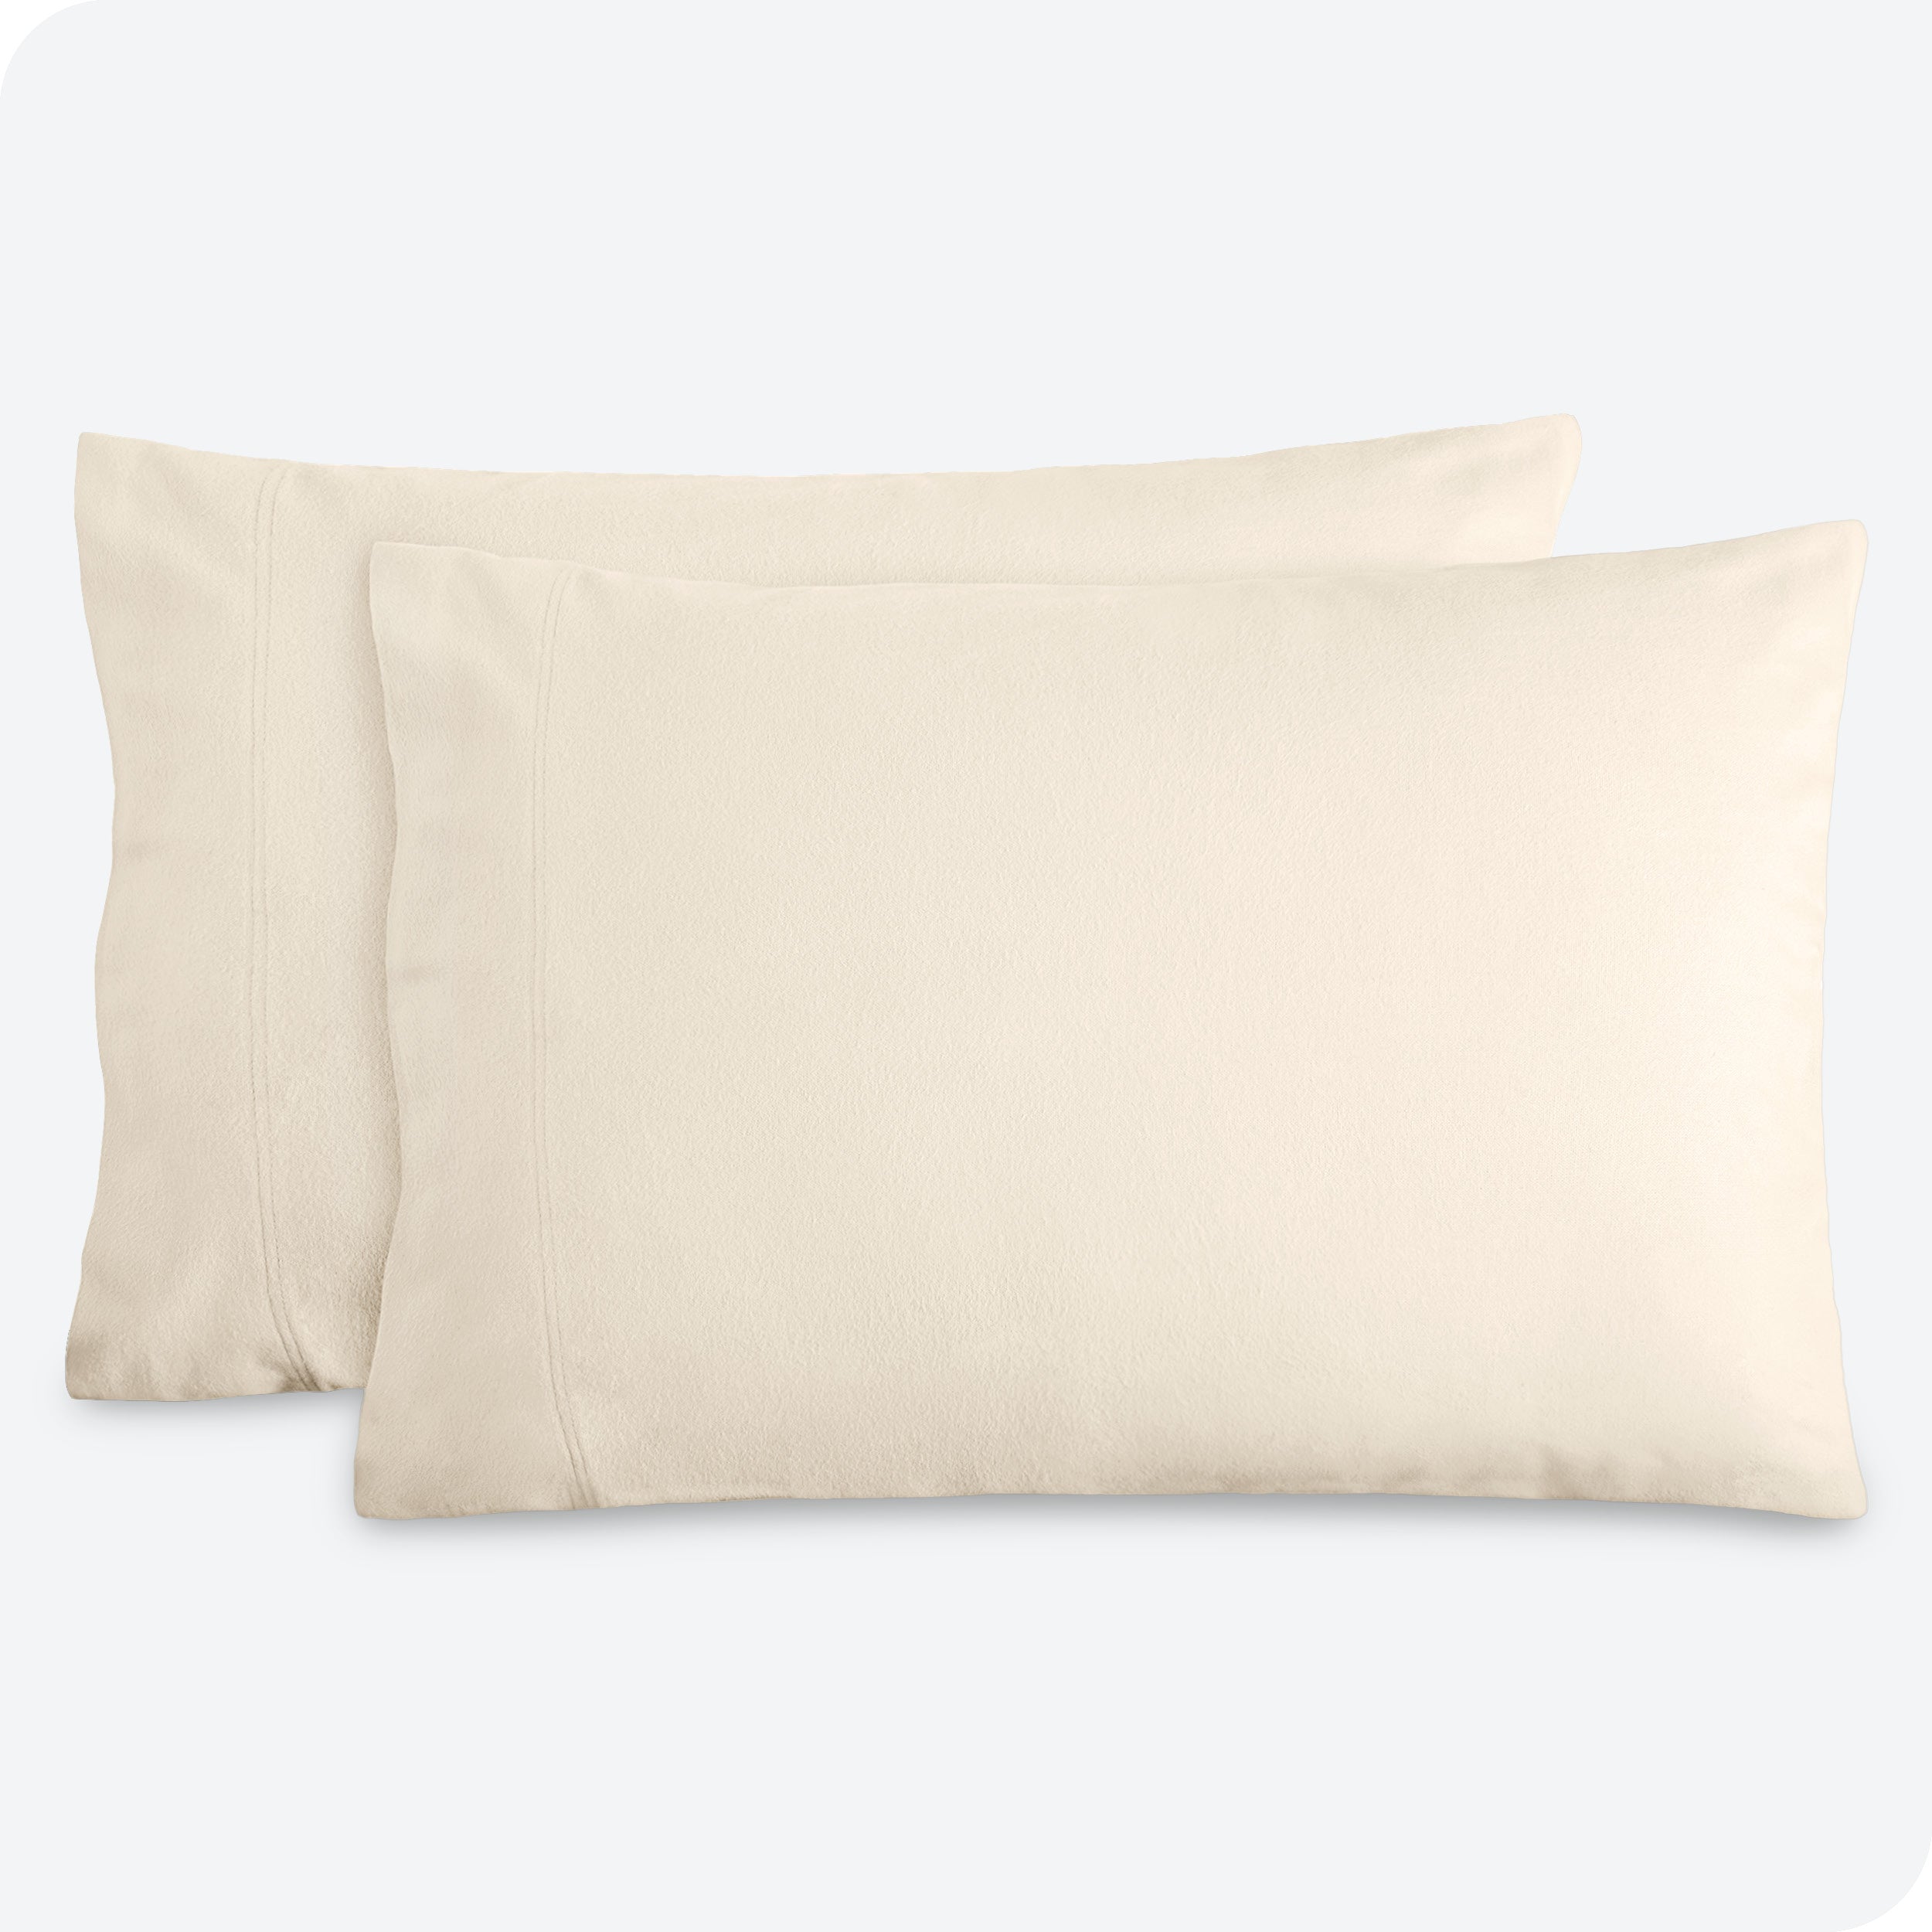 Two pillows with flannel pillowcases on them